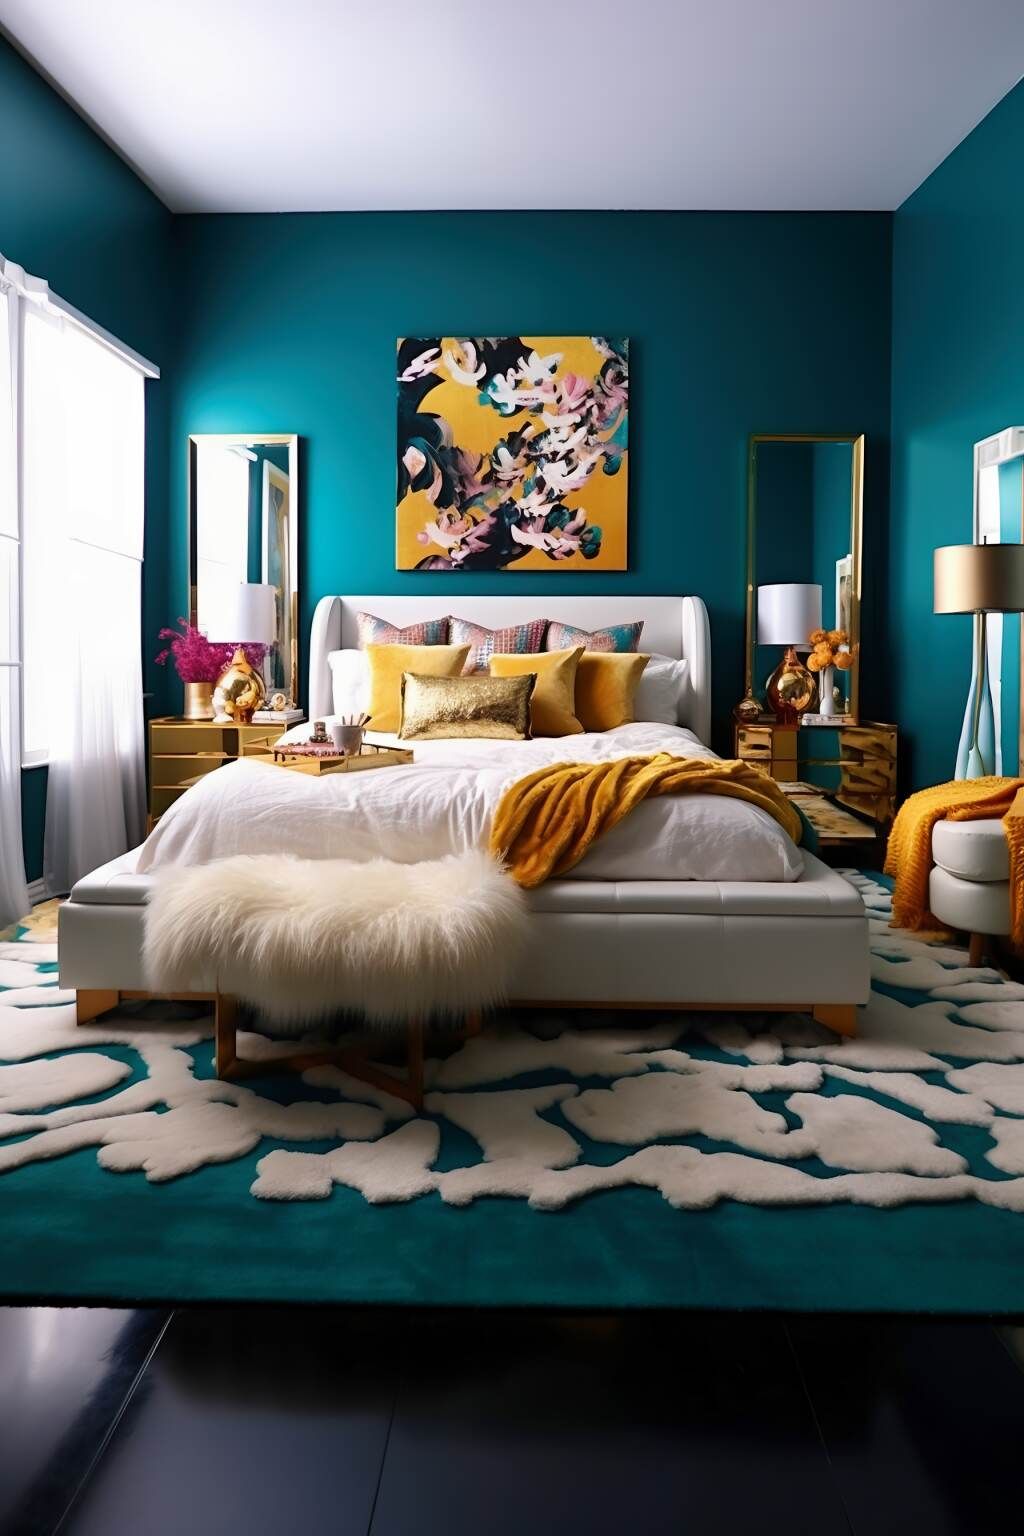 Turquoise Bedroom Designs Transform Your Space with Stunning Turquoise Interiors